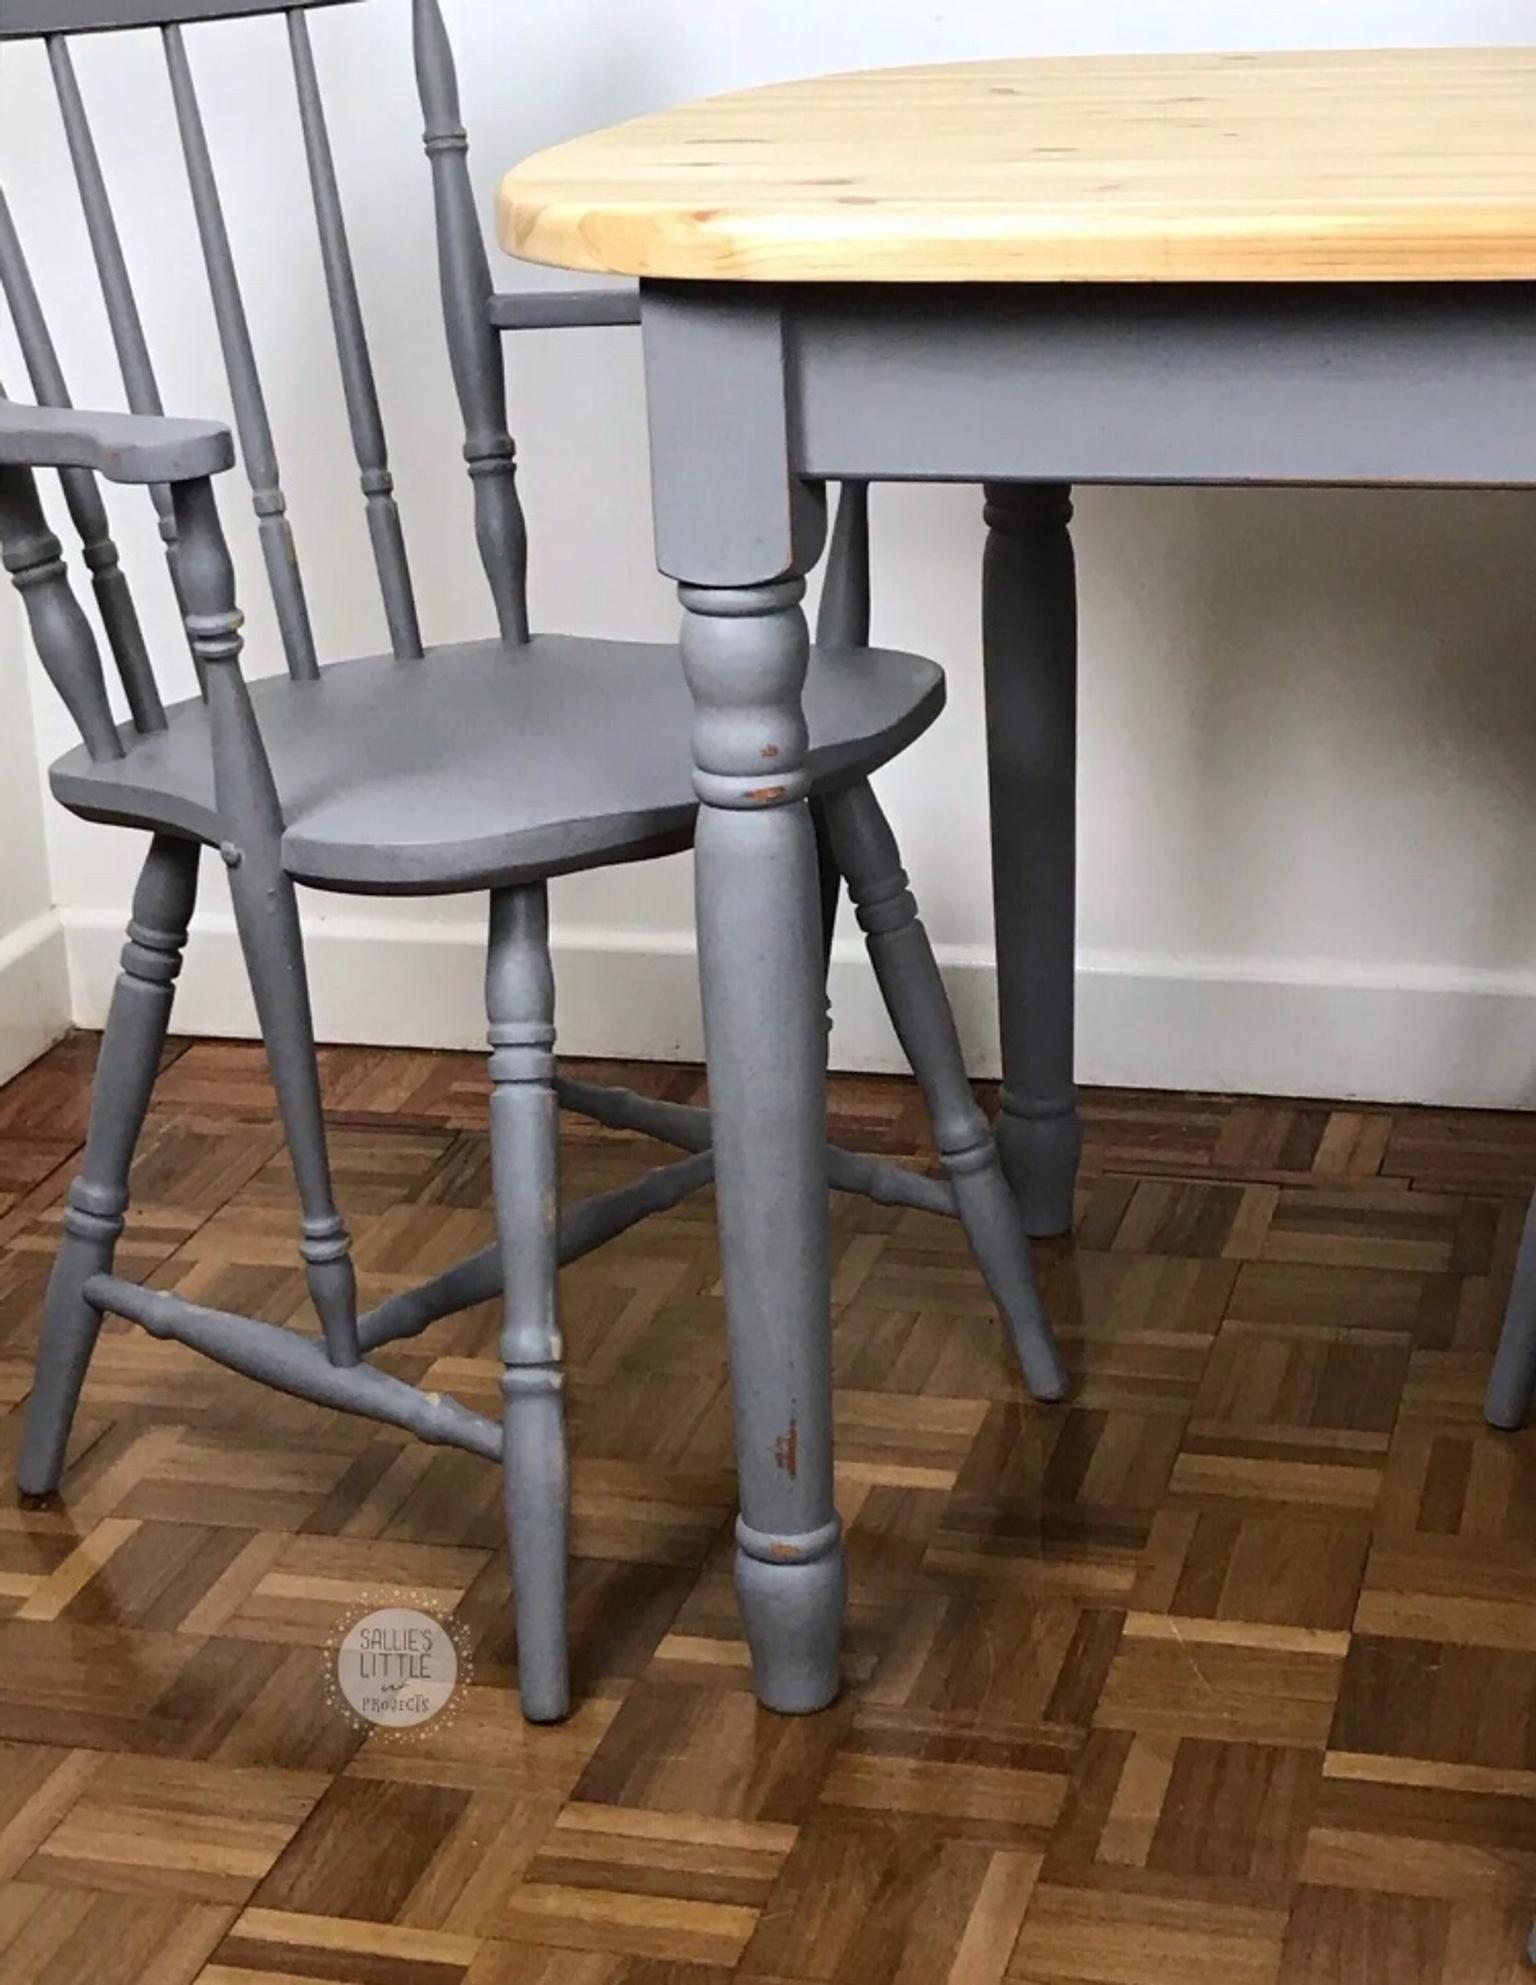 Grey Dining Table And Four Chair Set In Rg5 Sonning Fur 595 00